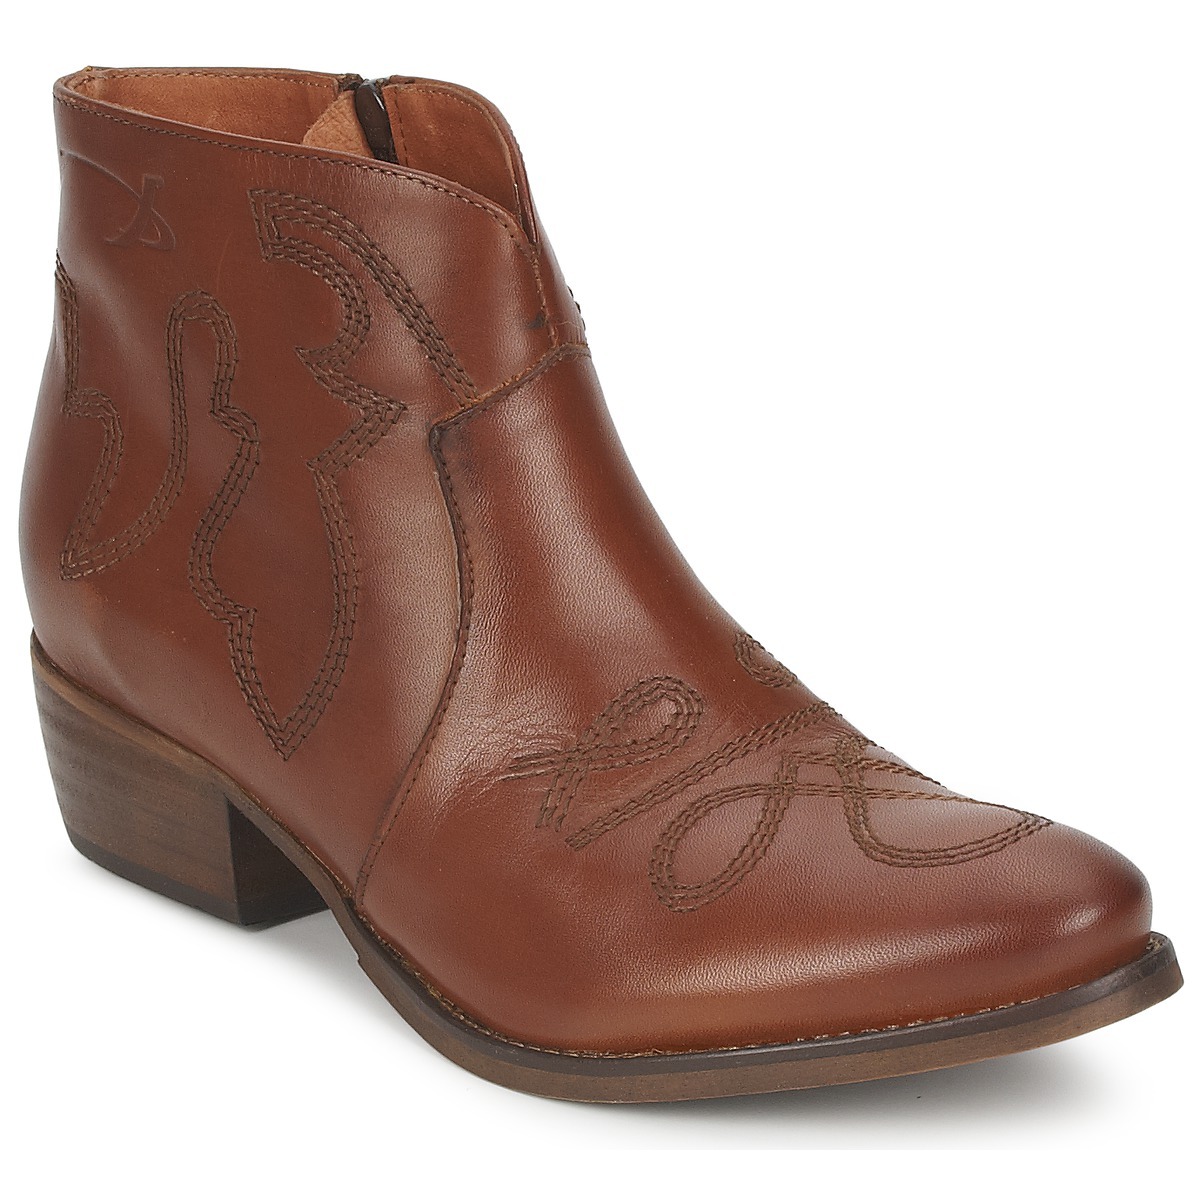 Spartoo Boots in Brown for Women from Pastelle GOOFASH